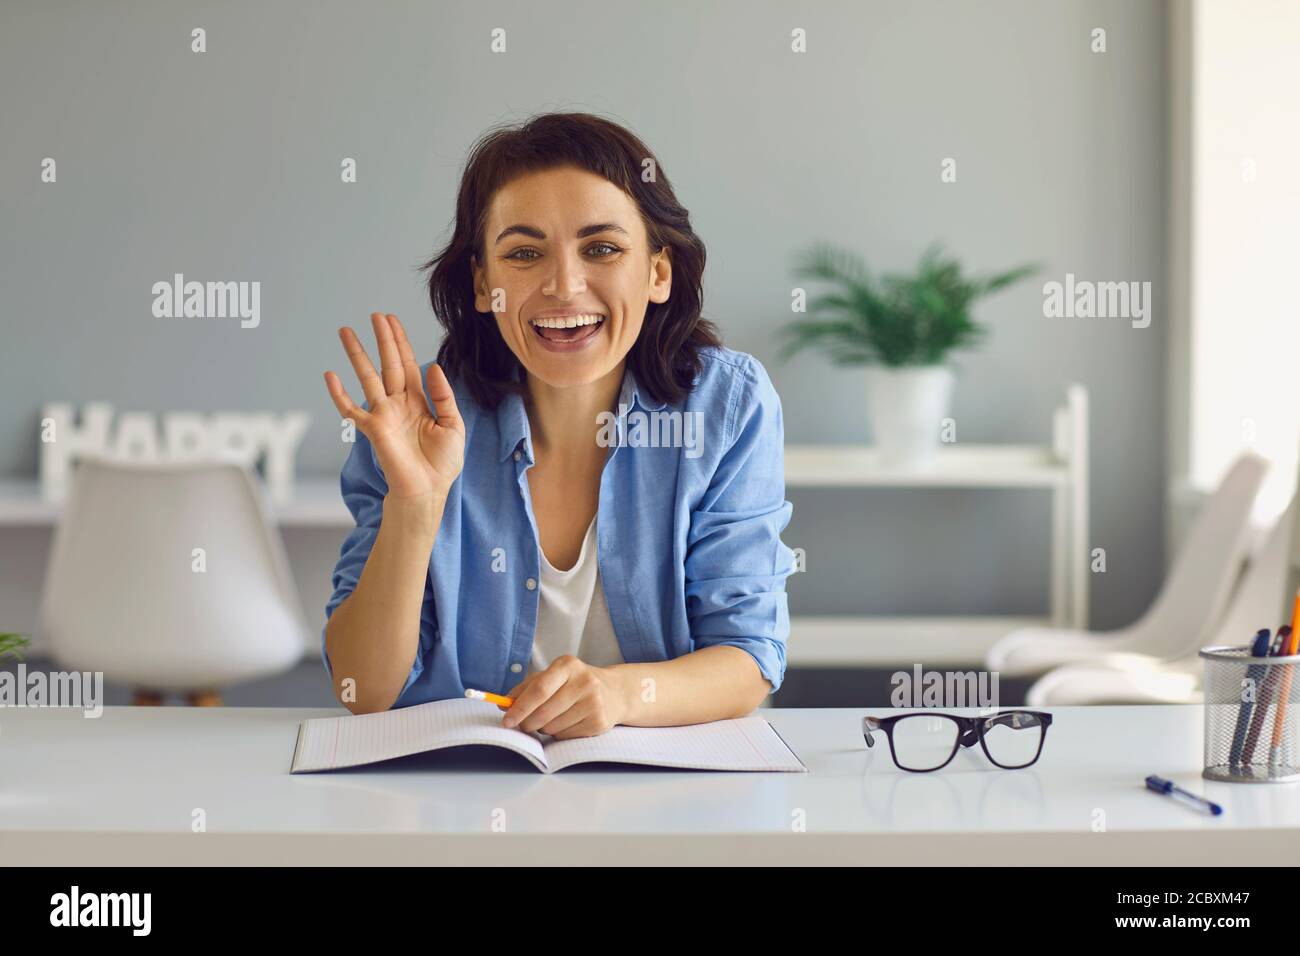 Young smiling woman looking at camera and greeting people online at home Stock Photo